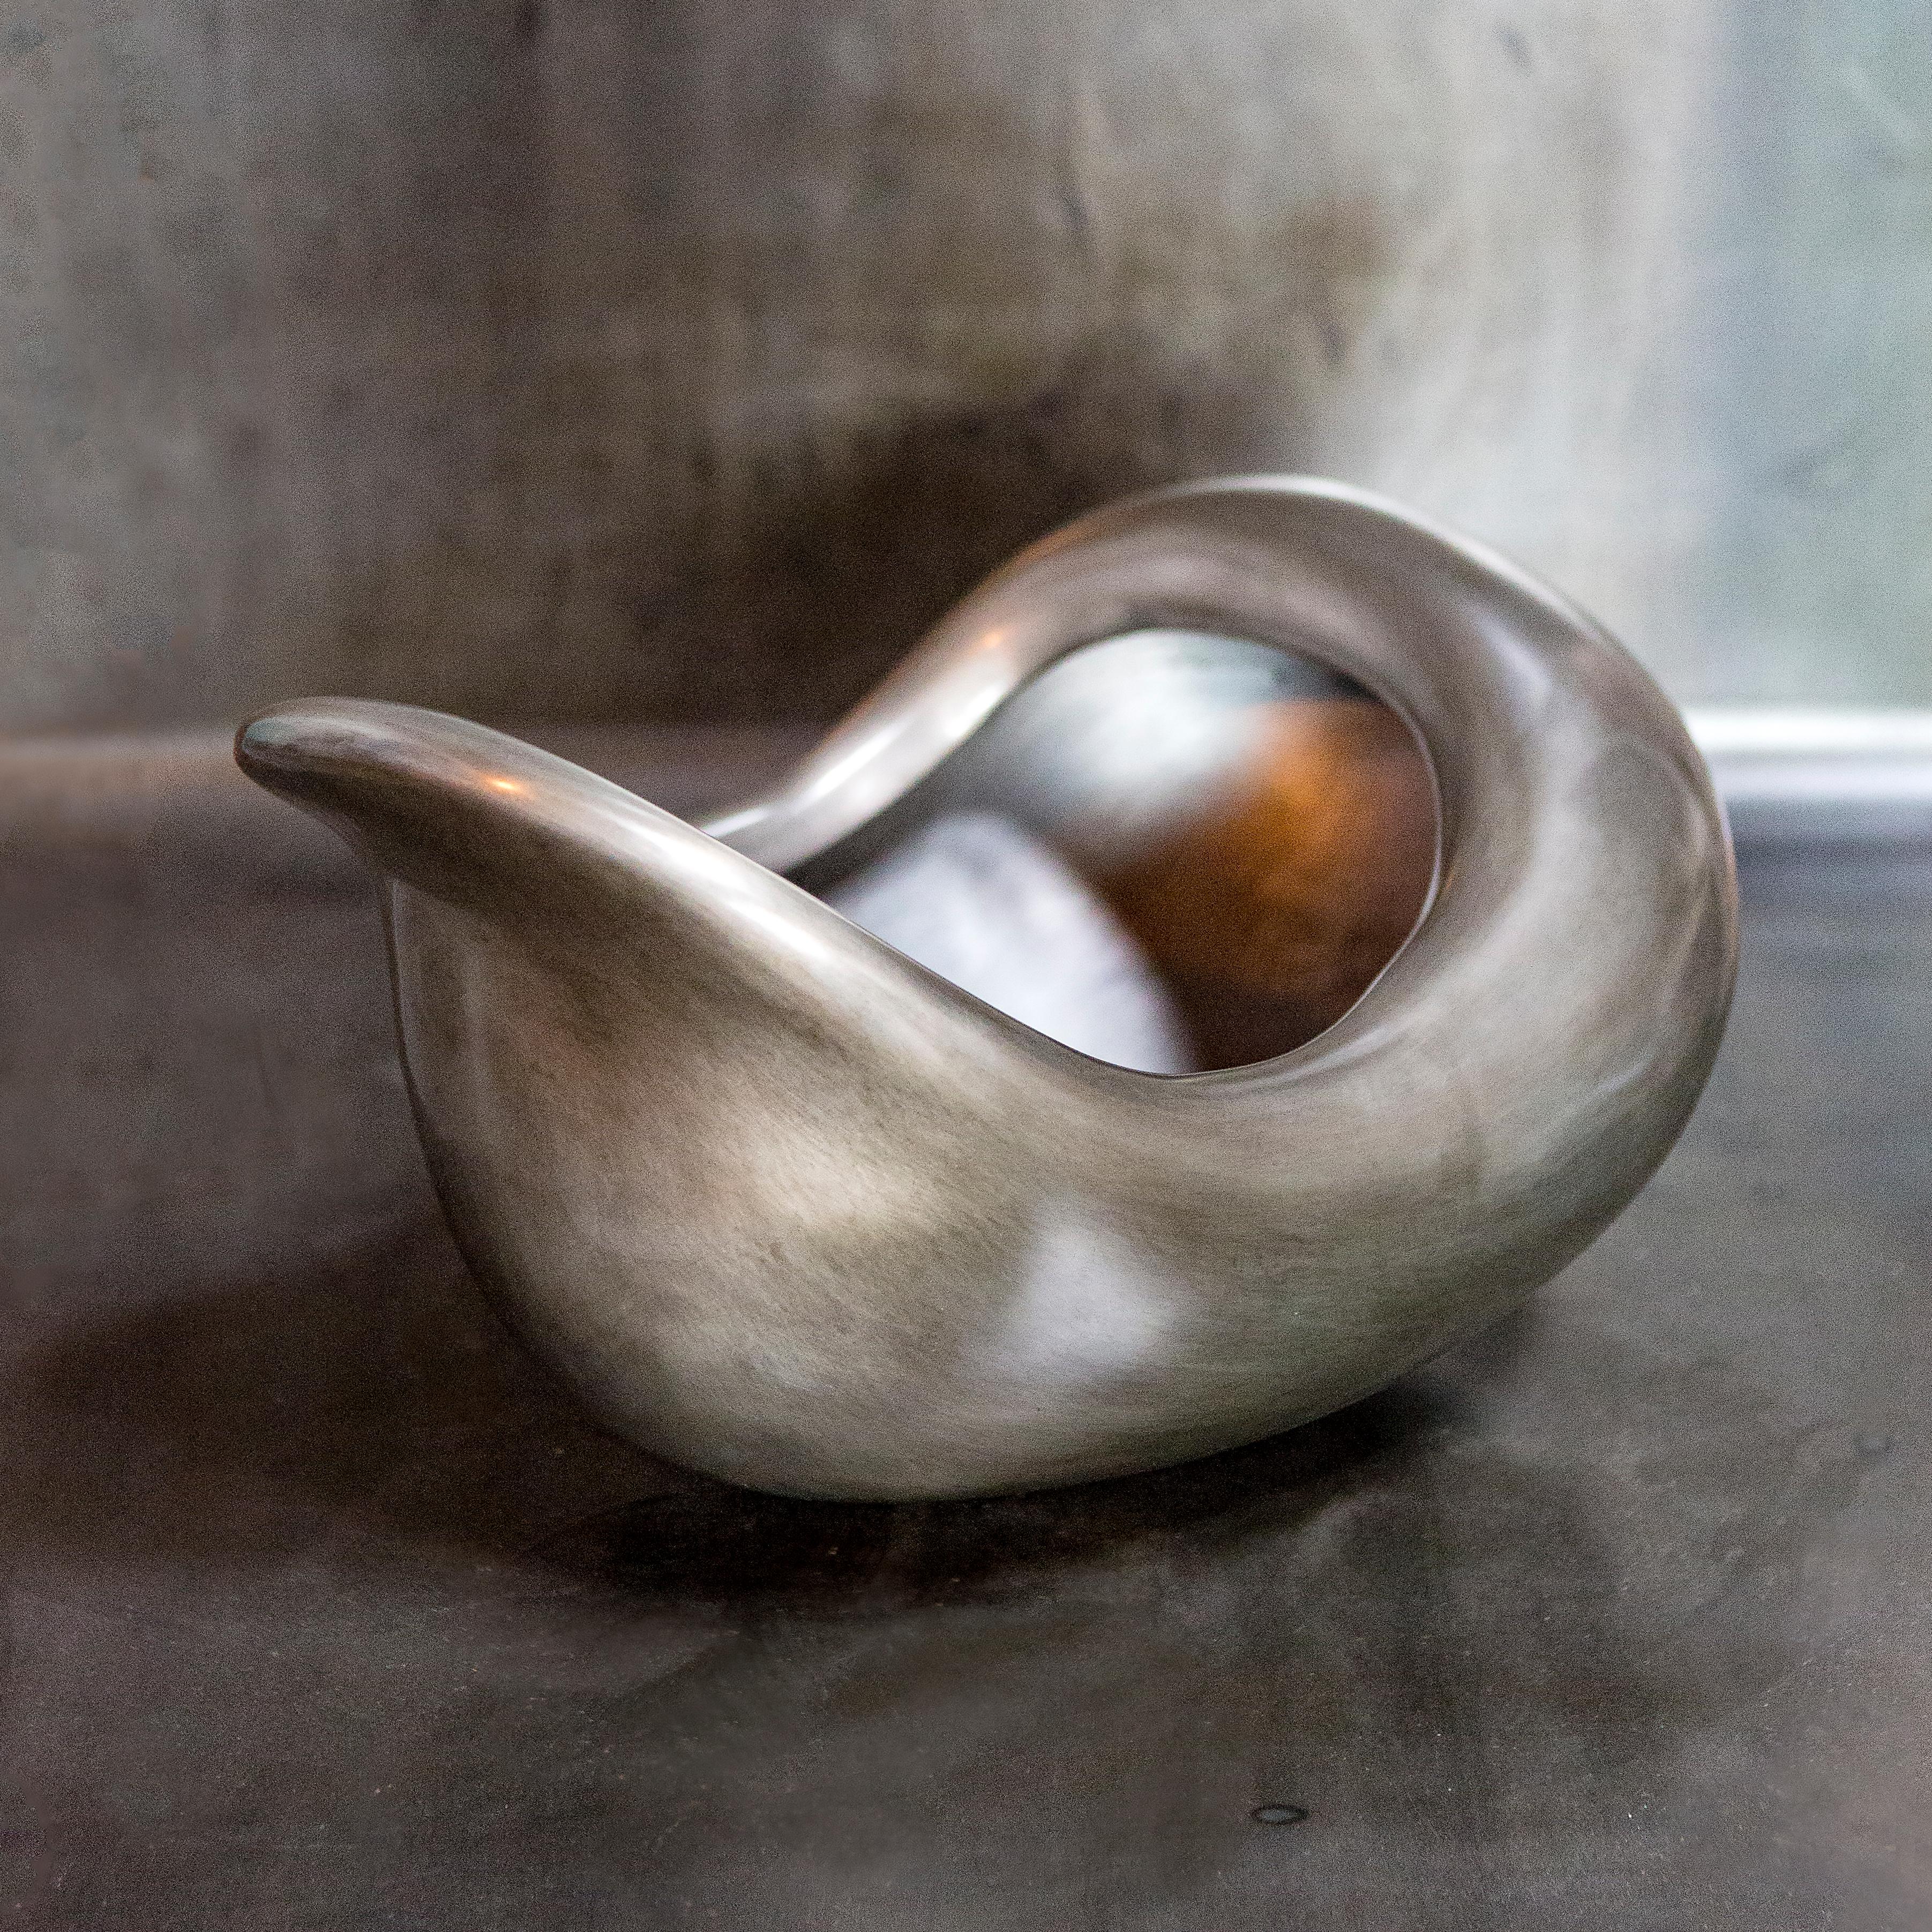 Jordan Mozer (b. 1958). East Bowl / Vase. Hand Carved, Cast Aluminum, hand polished,  with patina. Created for East Hotel, Hamburg.. Made in Chicago, USA, 2004. Collection of the Artist. Signed. Measurements: 19